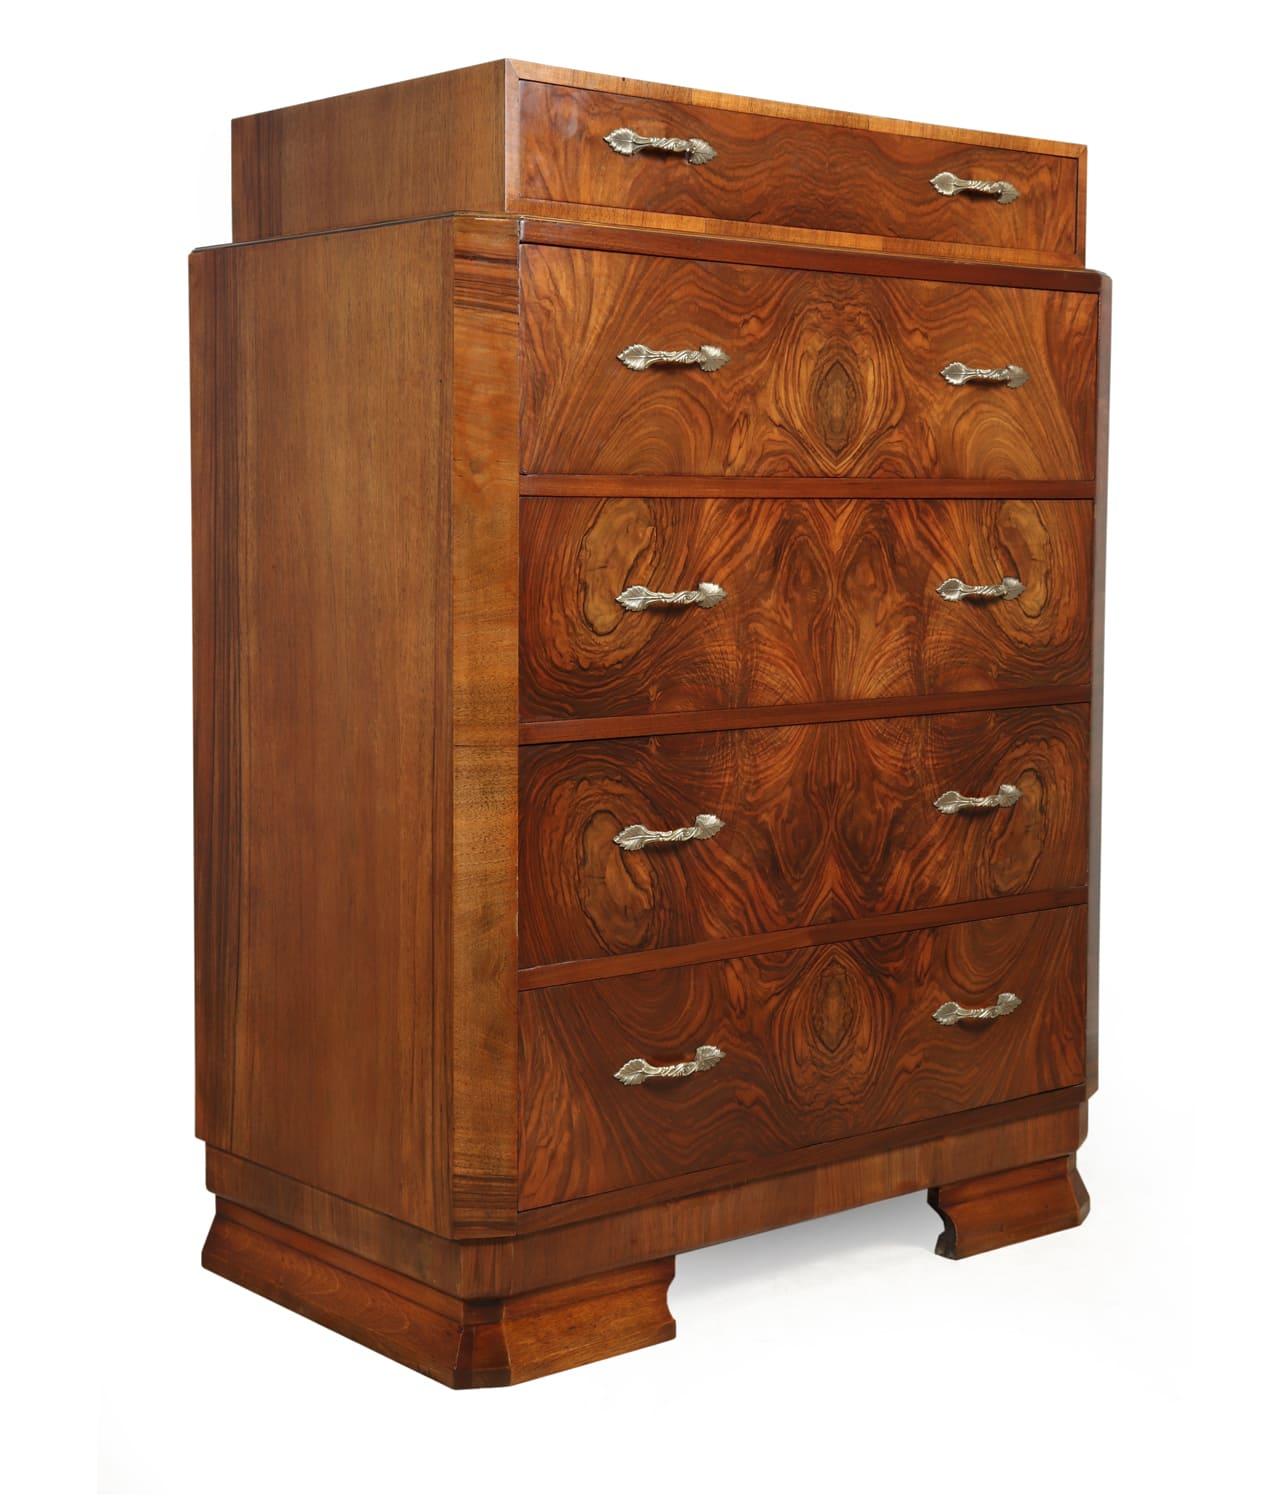 Art Deco walnut chest of drawers, circa 1930

A large walnut Art deco chest of drawers, having five drawers with dovetail joint construction canted corners and decorative brass handles, the chest is in excellent condition throughout and has been